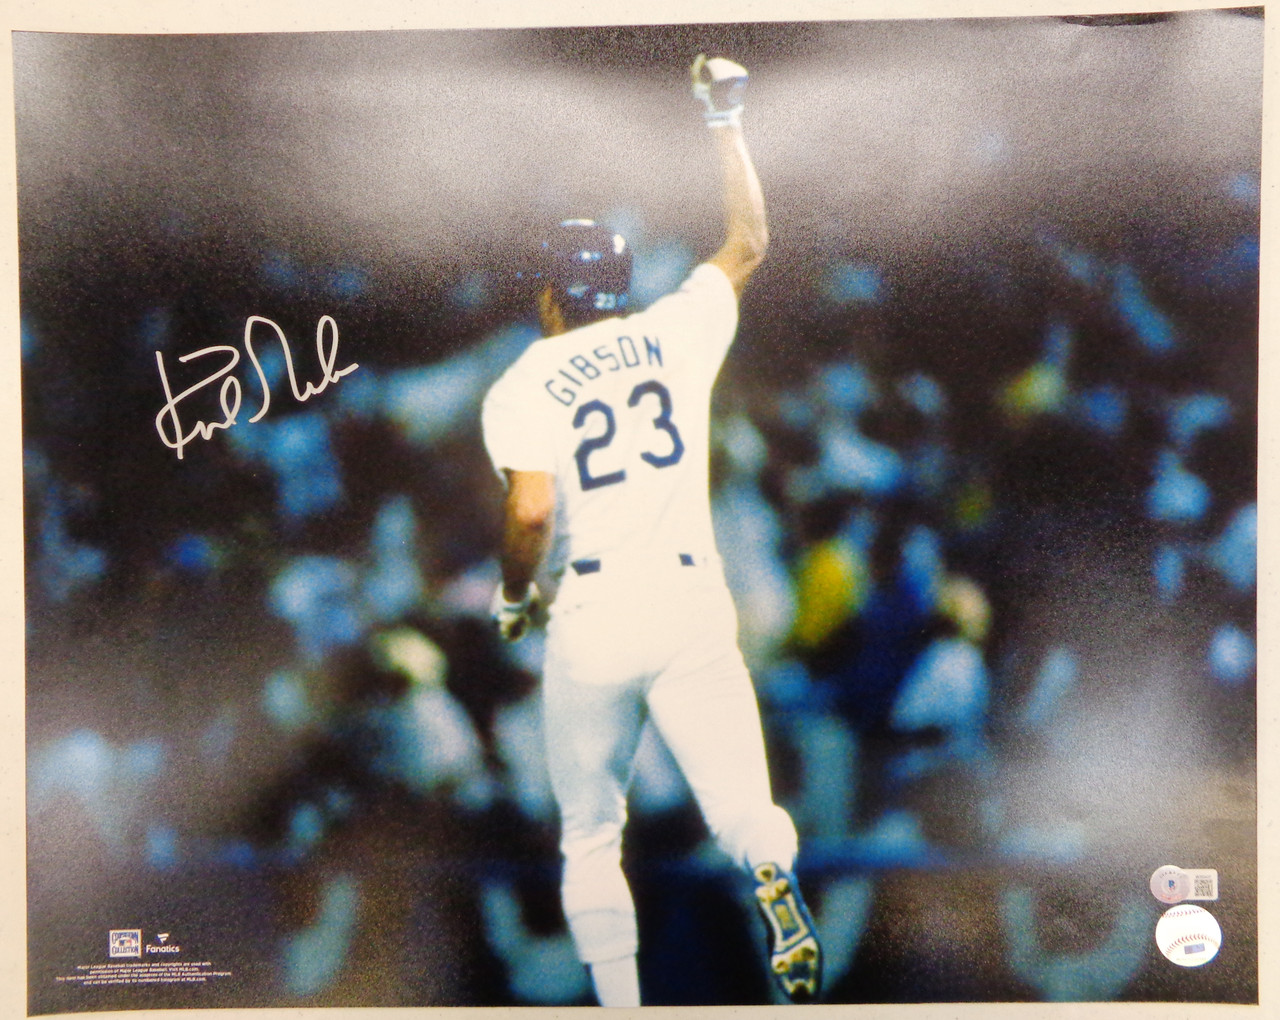 Kirk Gibson Los Angeles Dodgers - Limited Edition of 23 Framed Autographed  35 x 40 And Look Who's Coming Up 1988 World Series At-Bat Stretched  Canvas by Hobrecht Sports Art